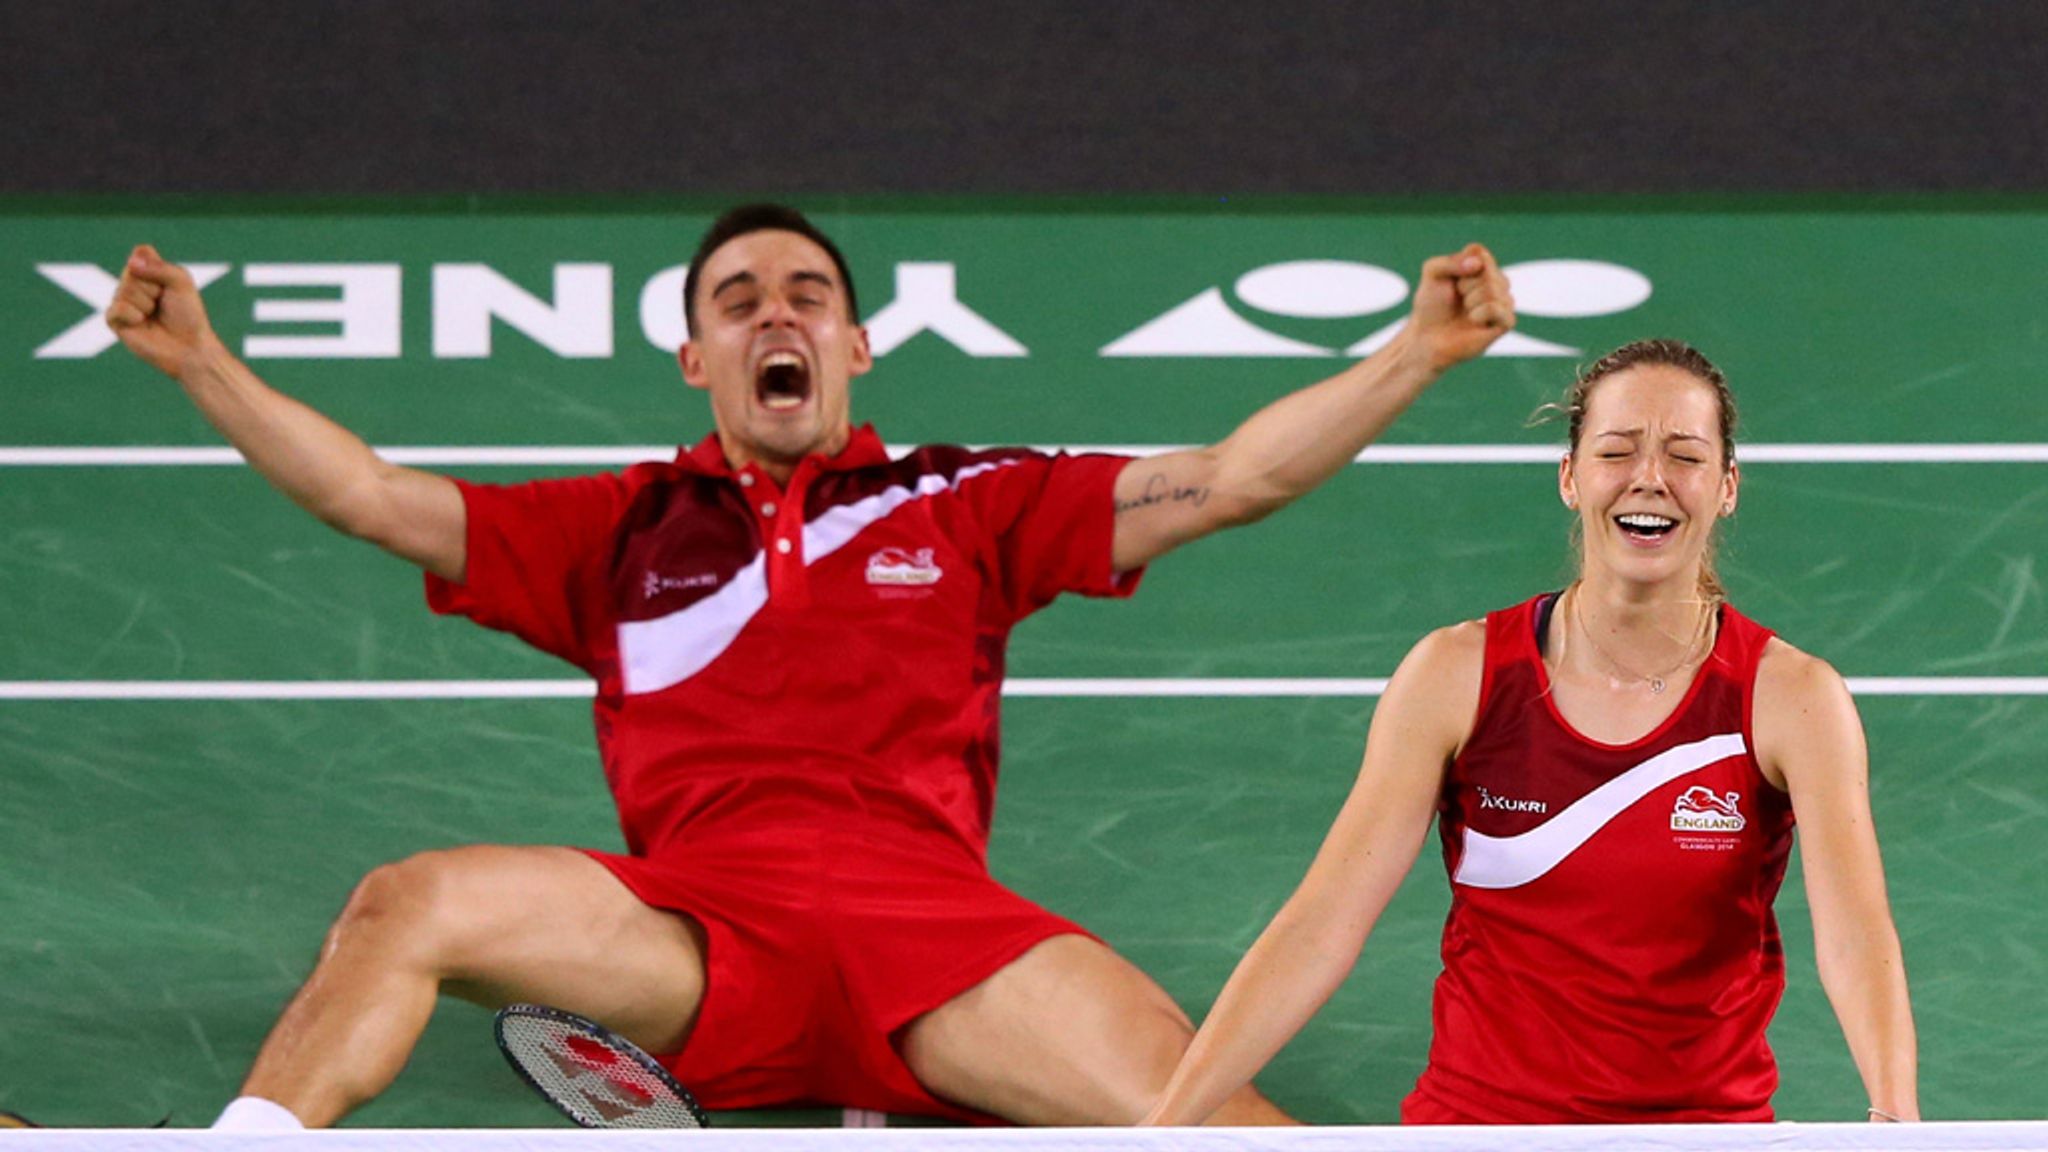 Chris and Gabby Adcock focusing on mixed doubles success at the YONEX All England Badminton News Sky Sports